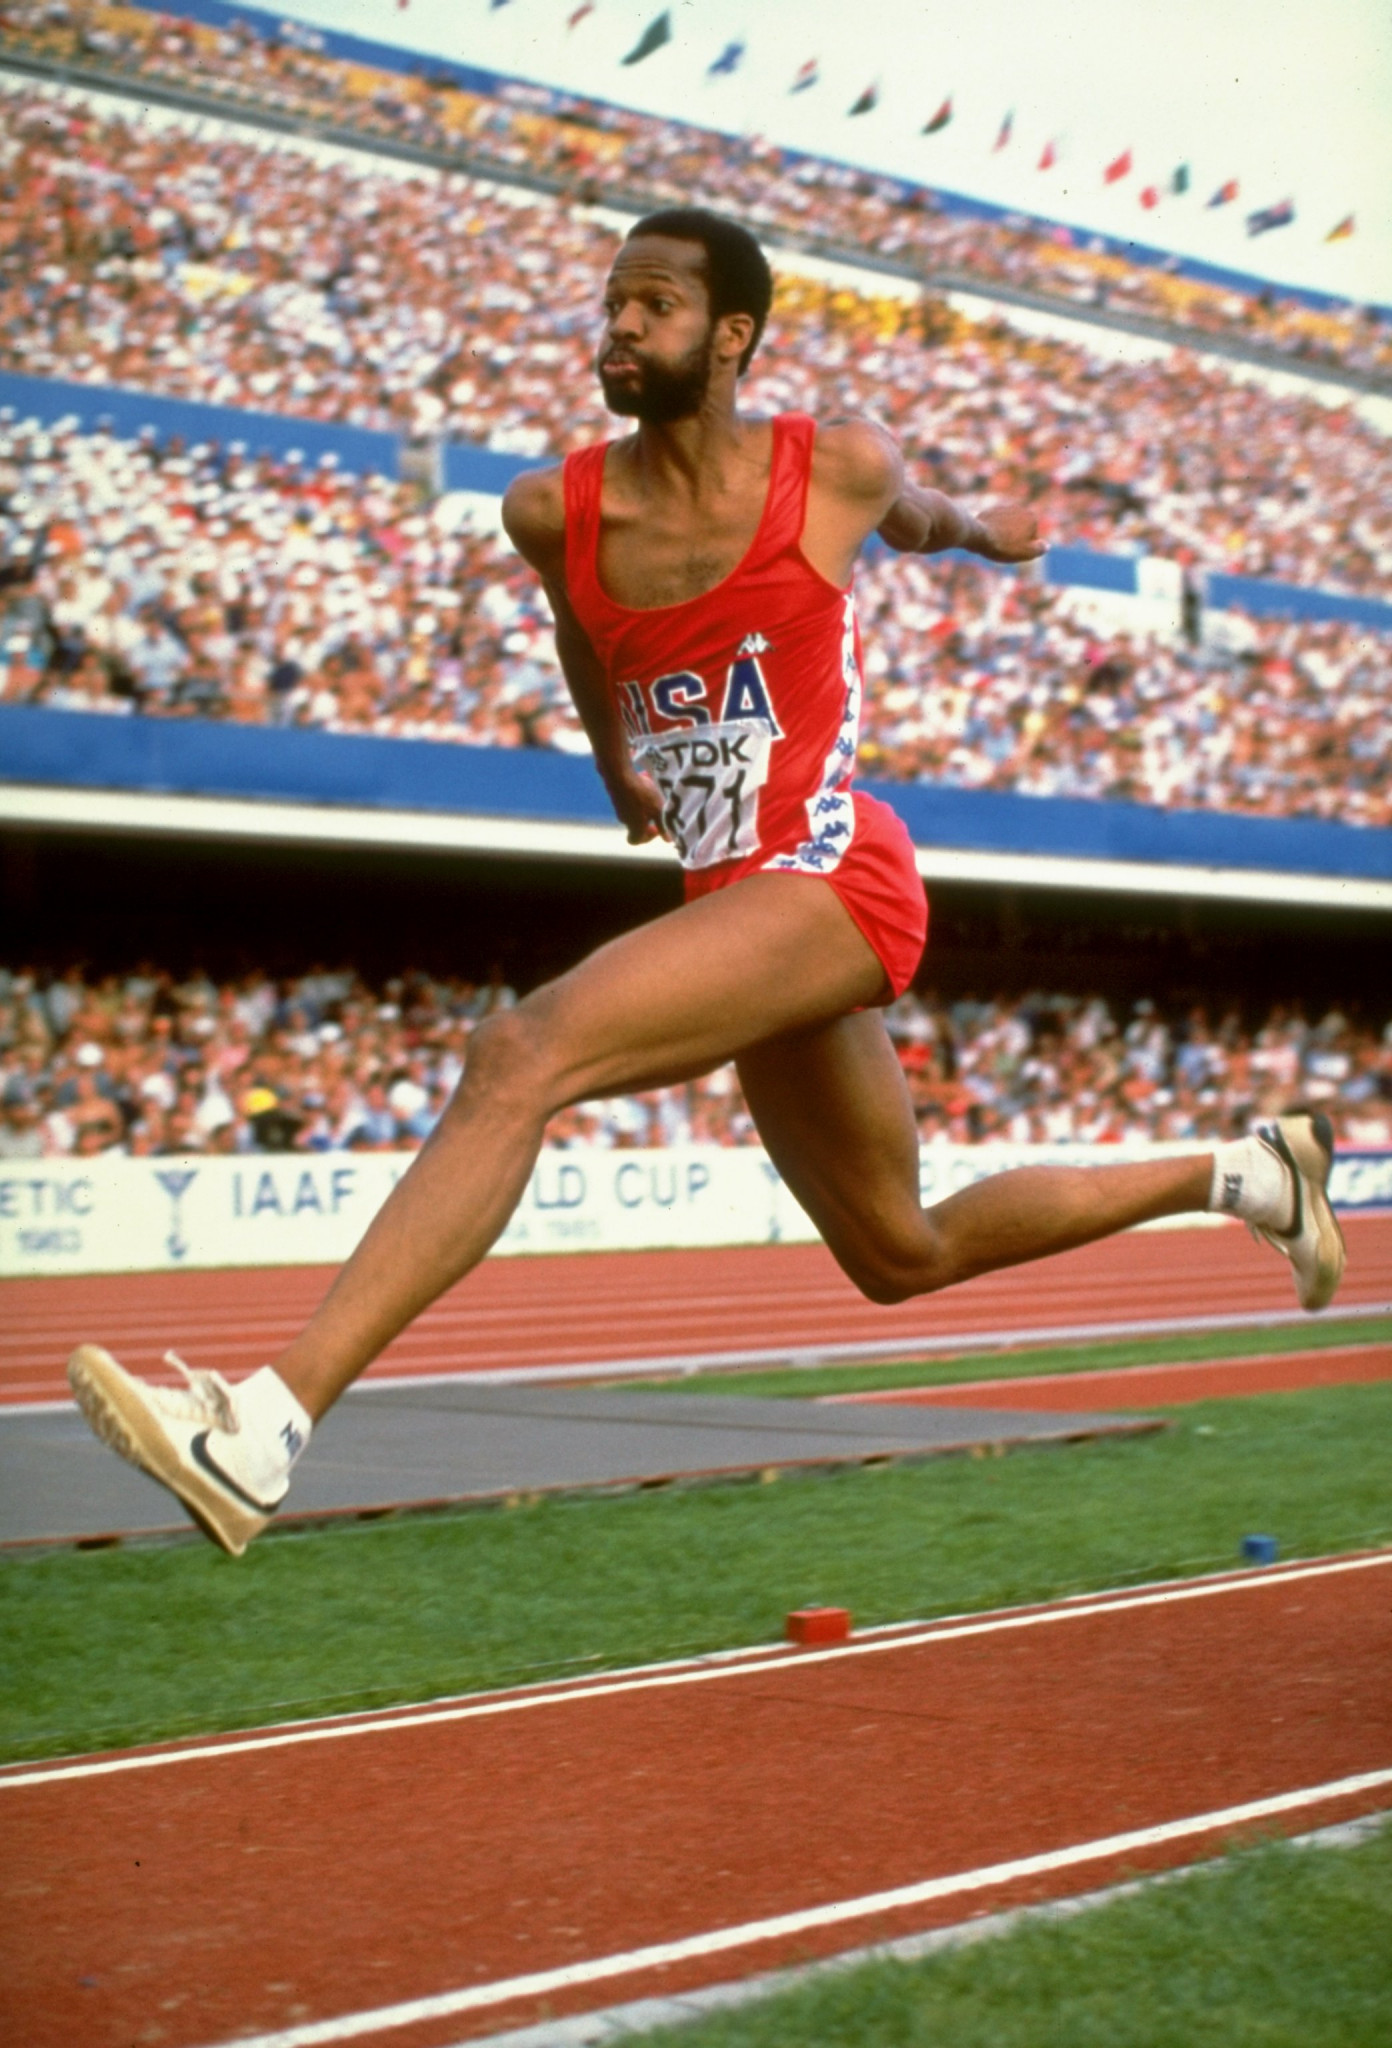 Willie Banks' best performance at a major international event was winning the silver medal at the 1983 World Championships in Helsinki but his career was affected by injuries ©Getty Images